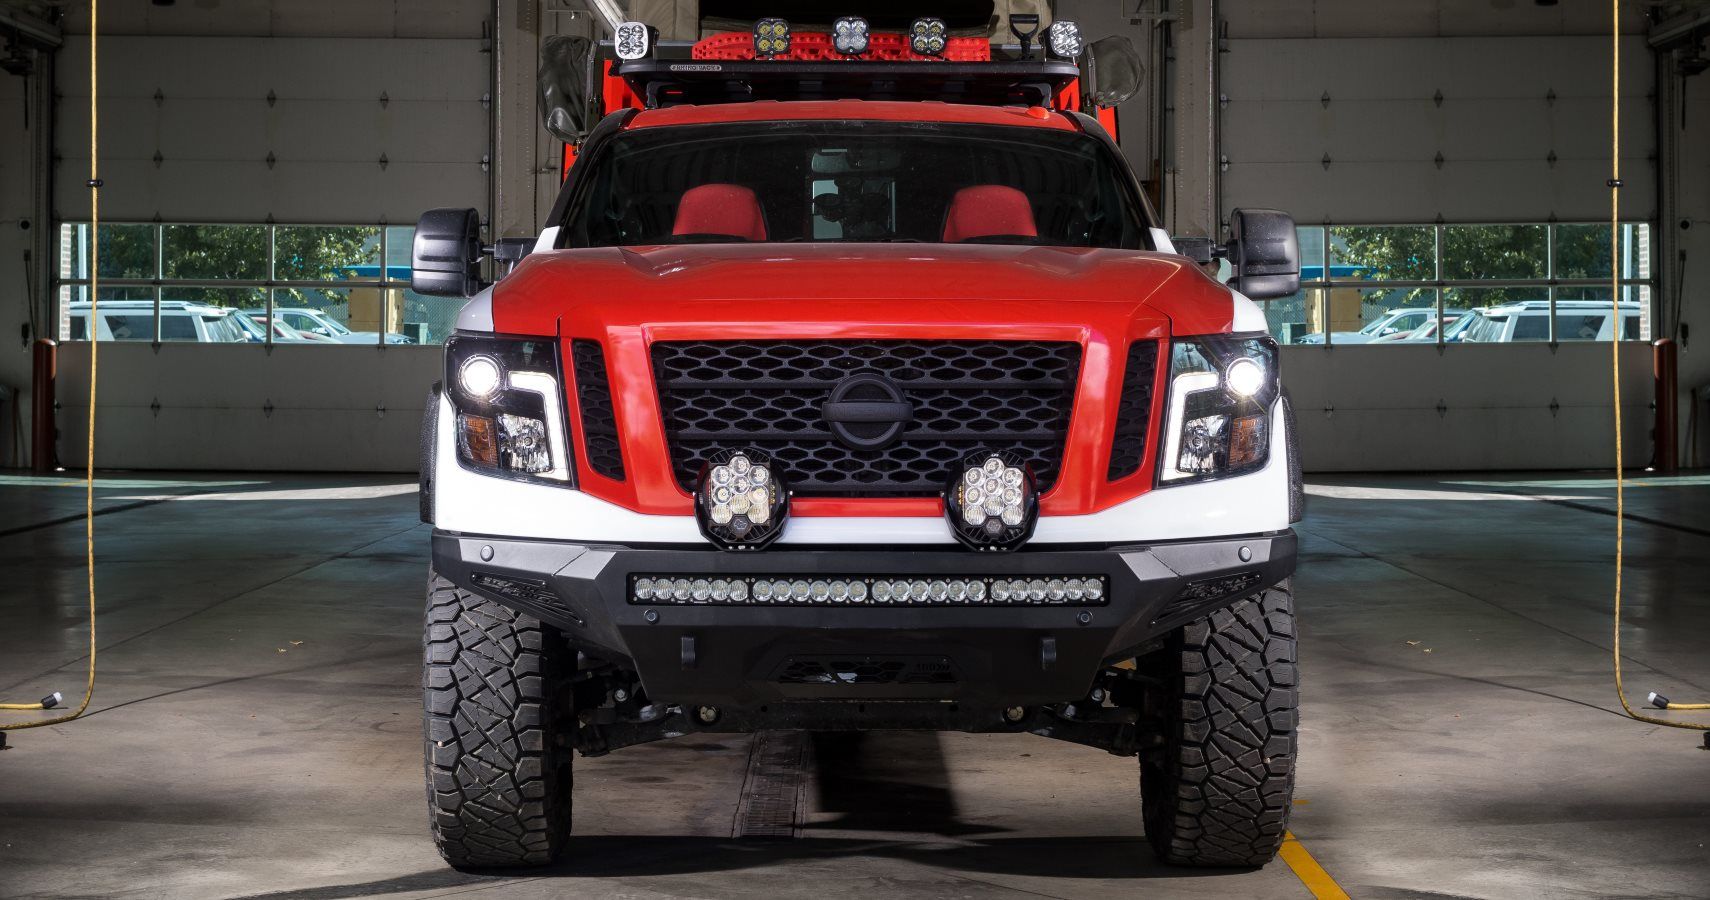 Check Out Nissan’s One-Off Pickup, The Service Titan